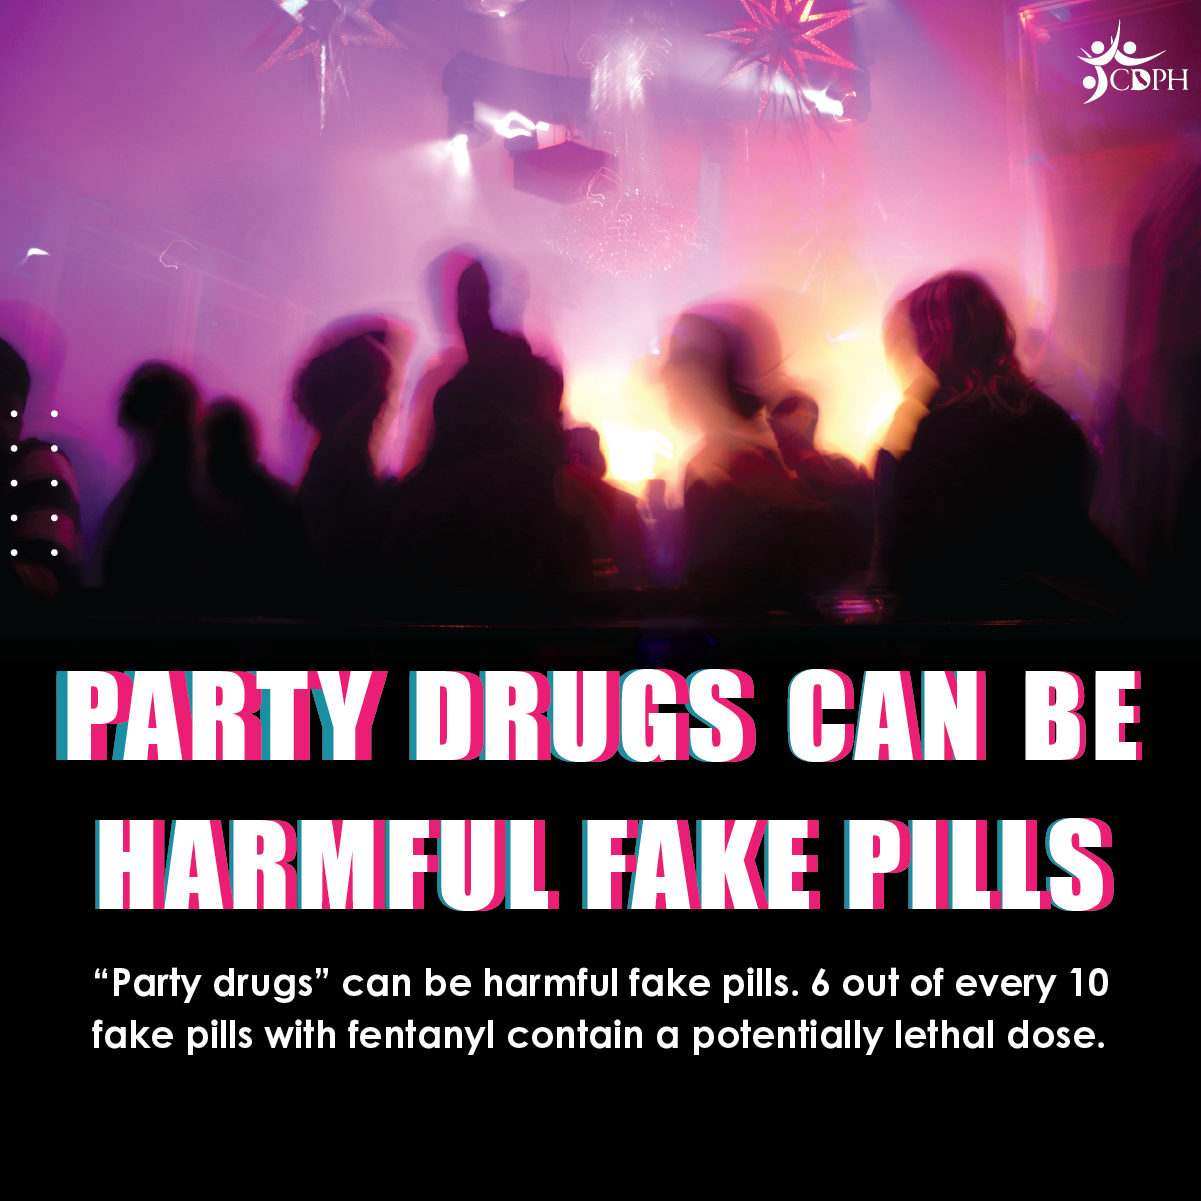 Party drugs can be harmful fake pills